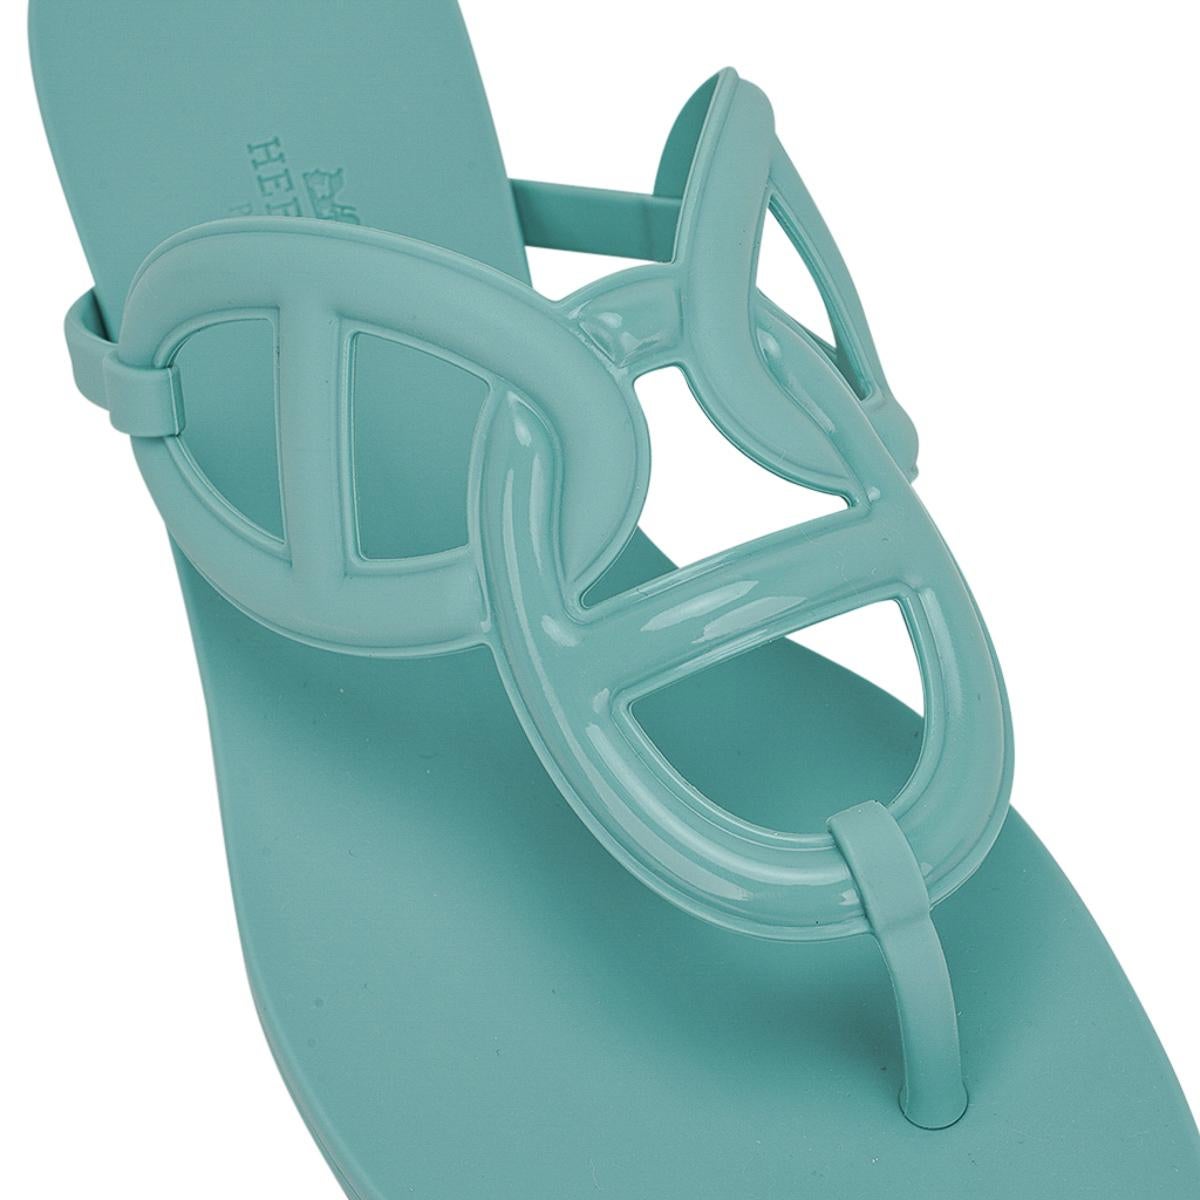 Mightychic offers limited edition Hermes Egerie waterproof sandals featured in Vert Embrun.
The thong sandal was inspired by the iconic Chaine d'Ancre motif.
Sold out and extremely difficult to procure.
Made from TPU, a PVC derivative, the sandal is